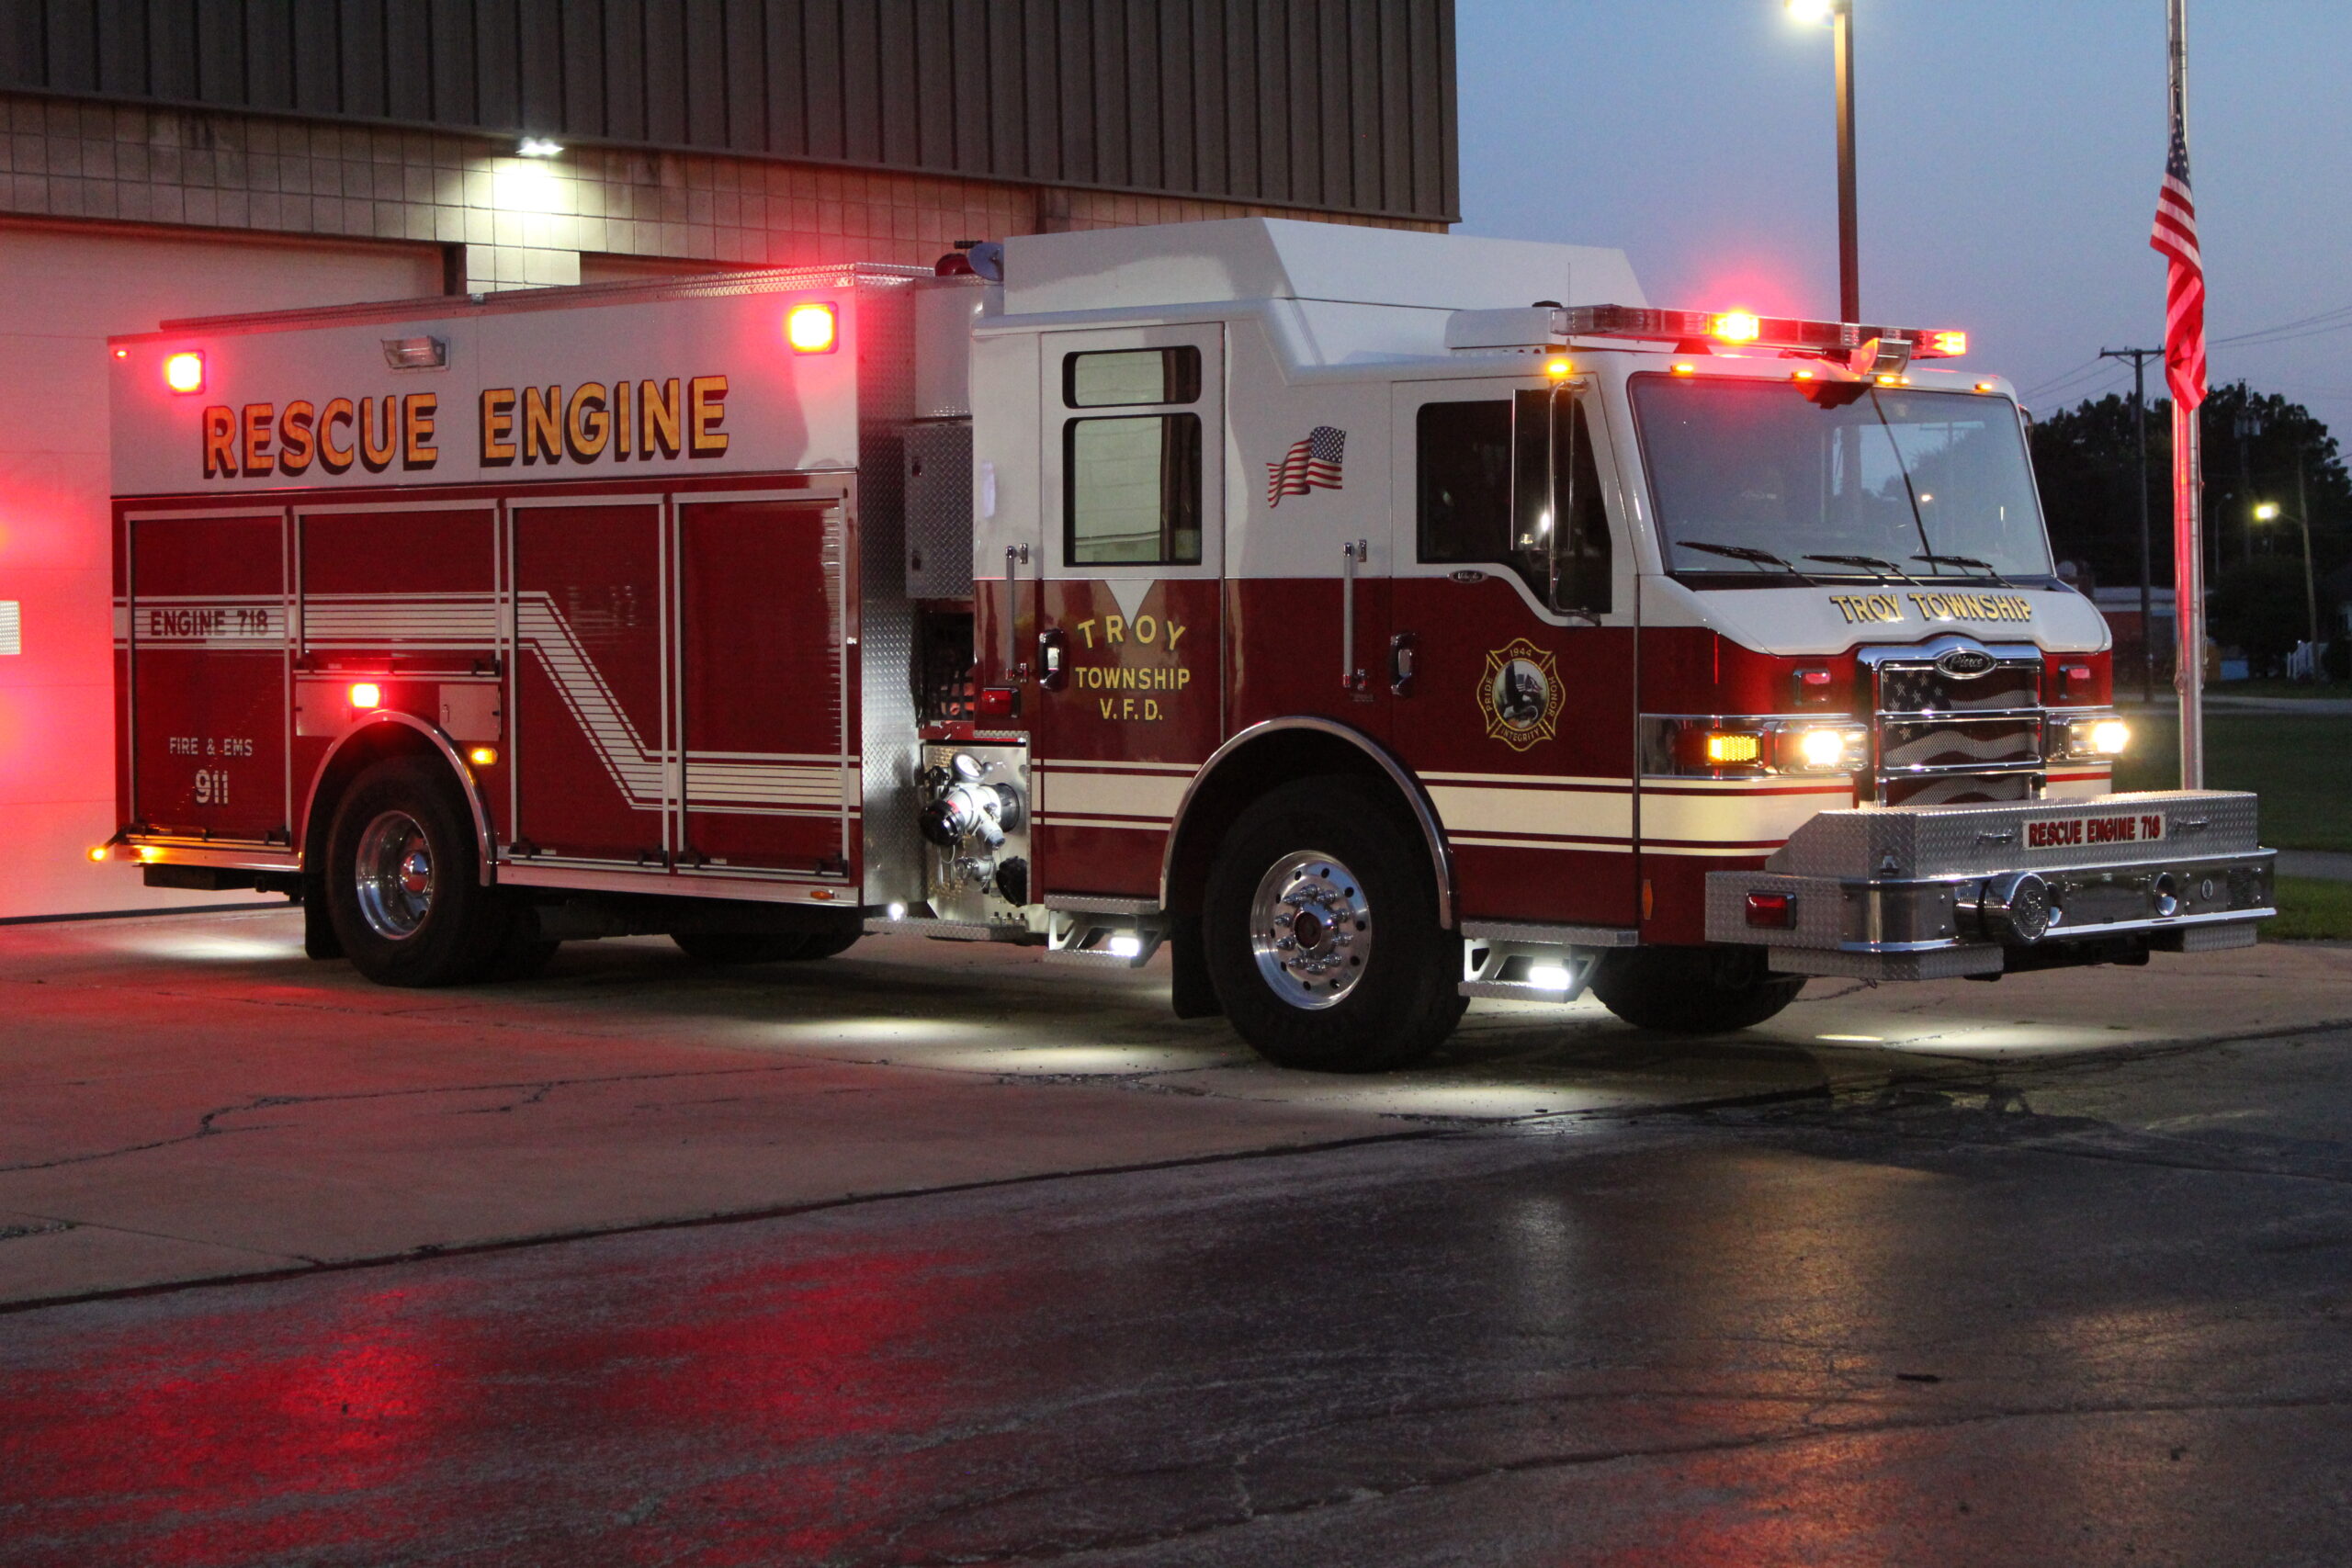 Troy Township Volunteer Fire Department